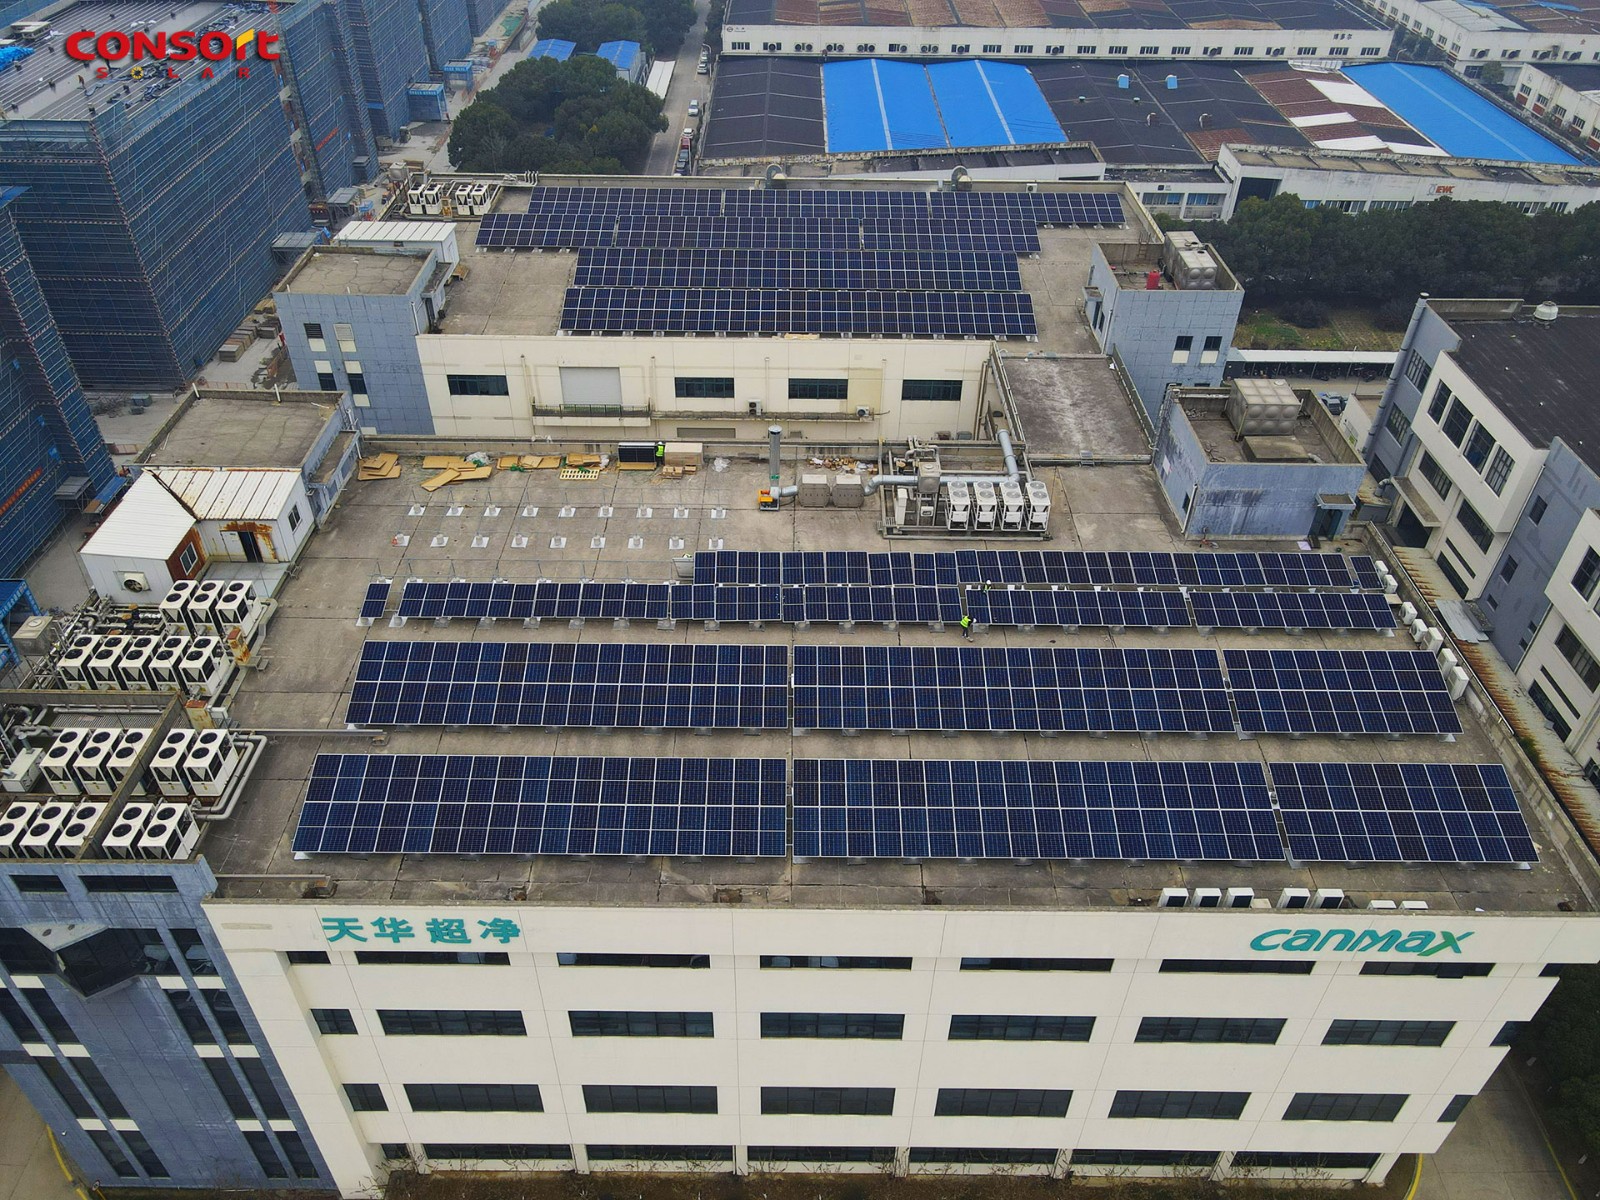 Canmax Industrial and Commercial Roof Distributed PV Project